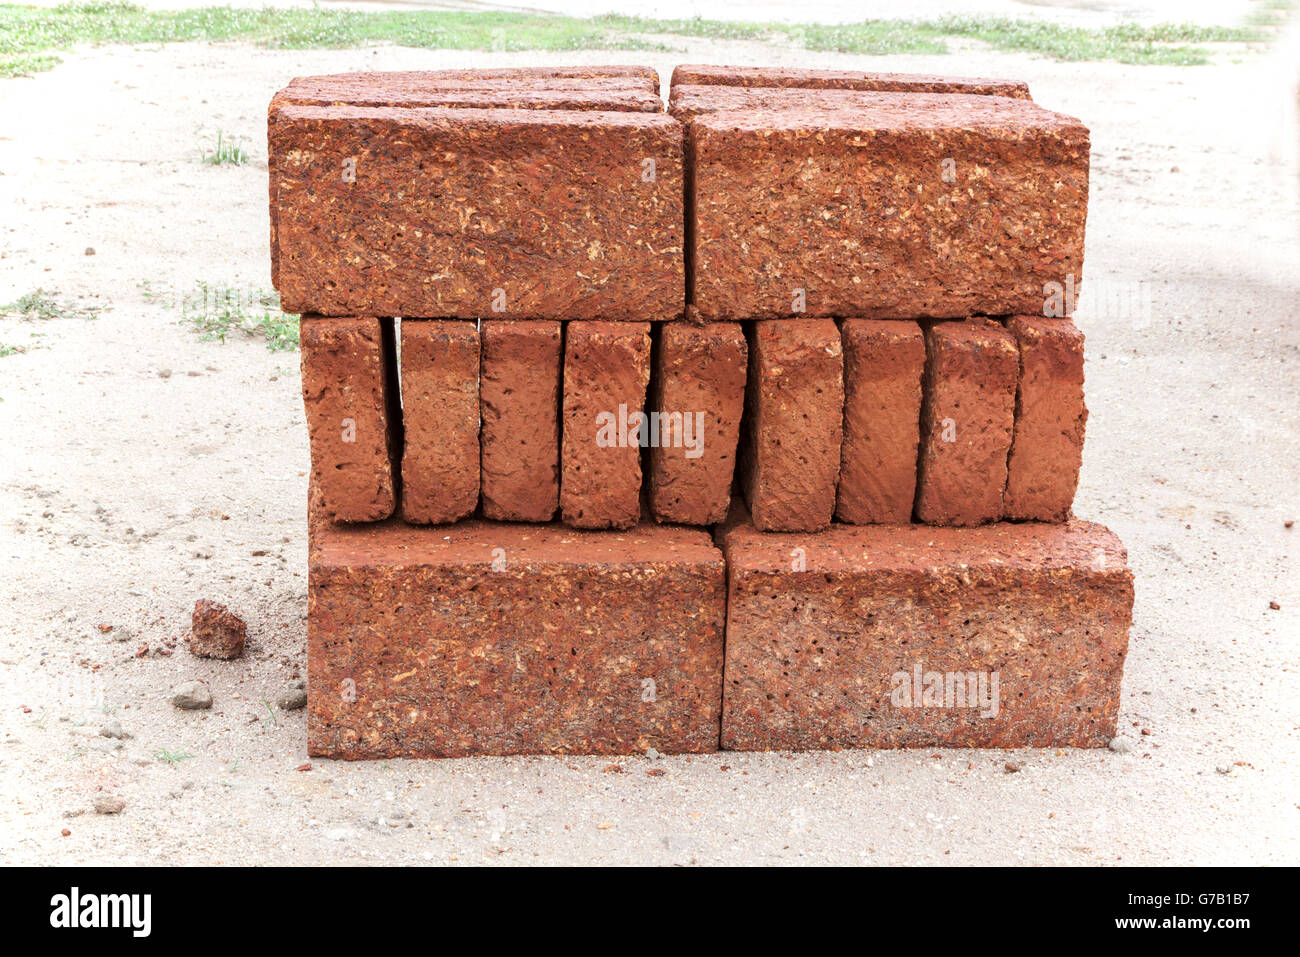 laterite pile a hazel filled with rough surfaces on floor Stock Photo